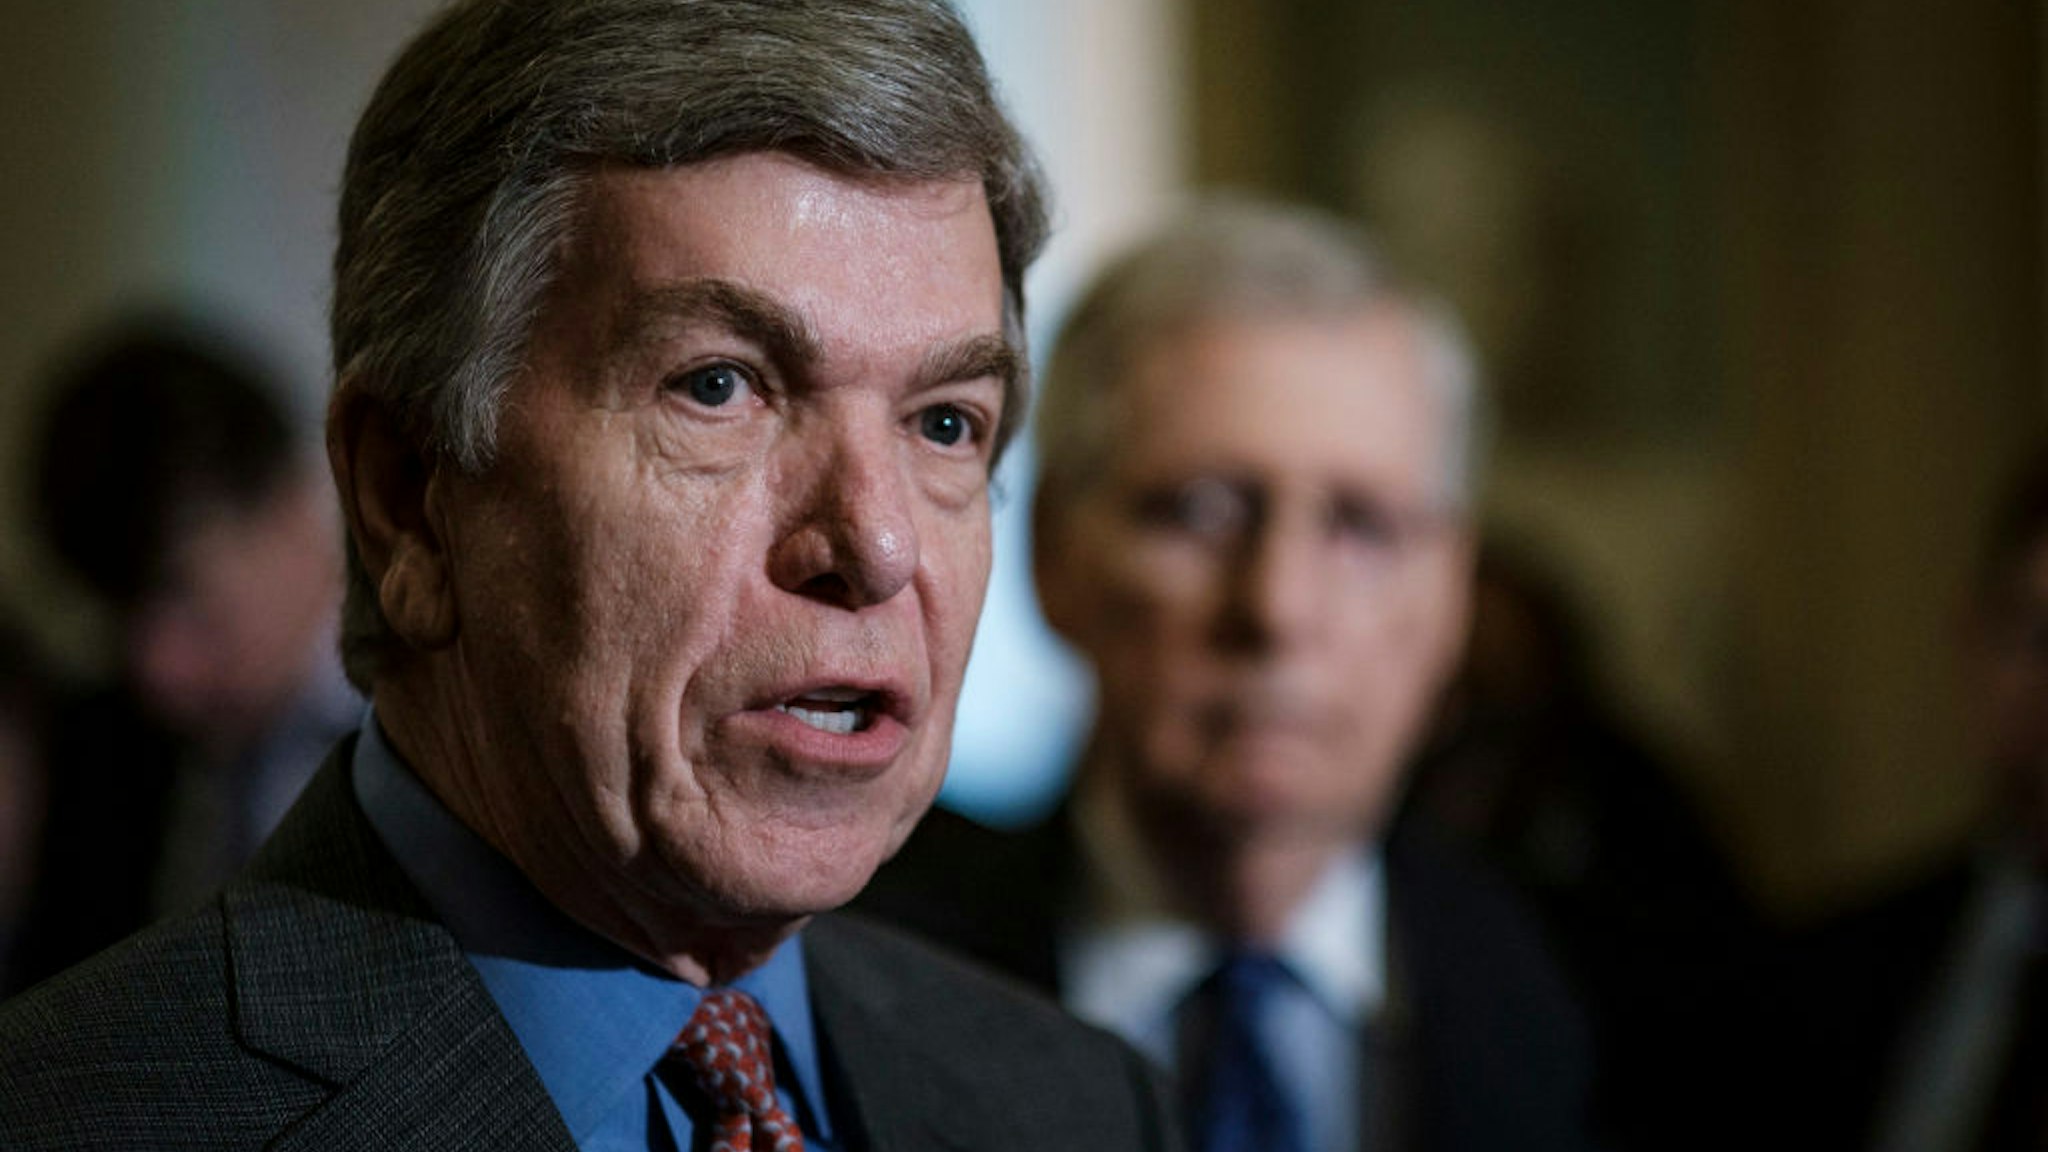 Senator Roy Blunt (R-MO) speaks to the media following their weekly policy luncheon on April 30, 2019 in Washington, DC.